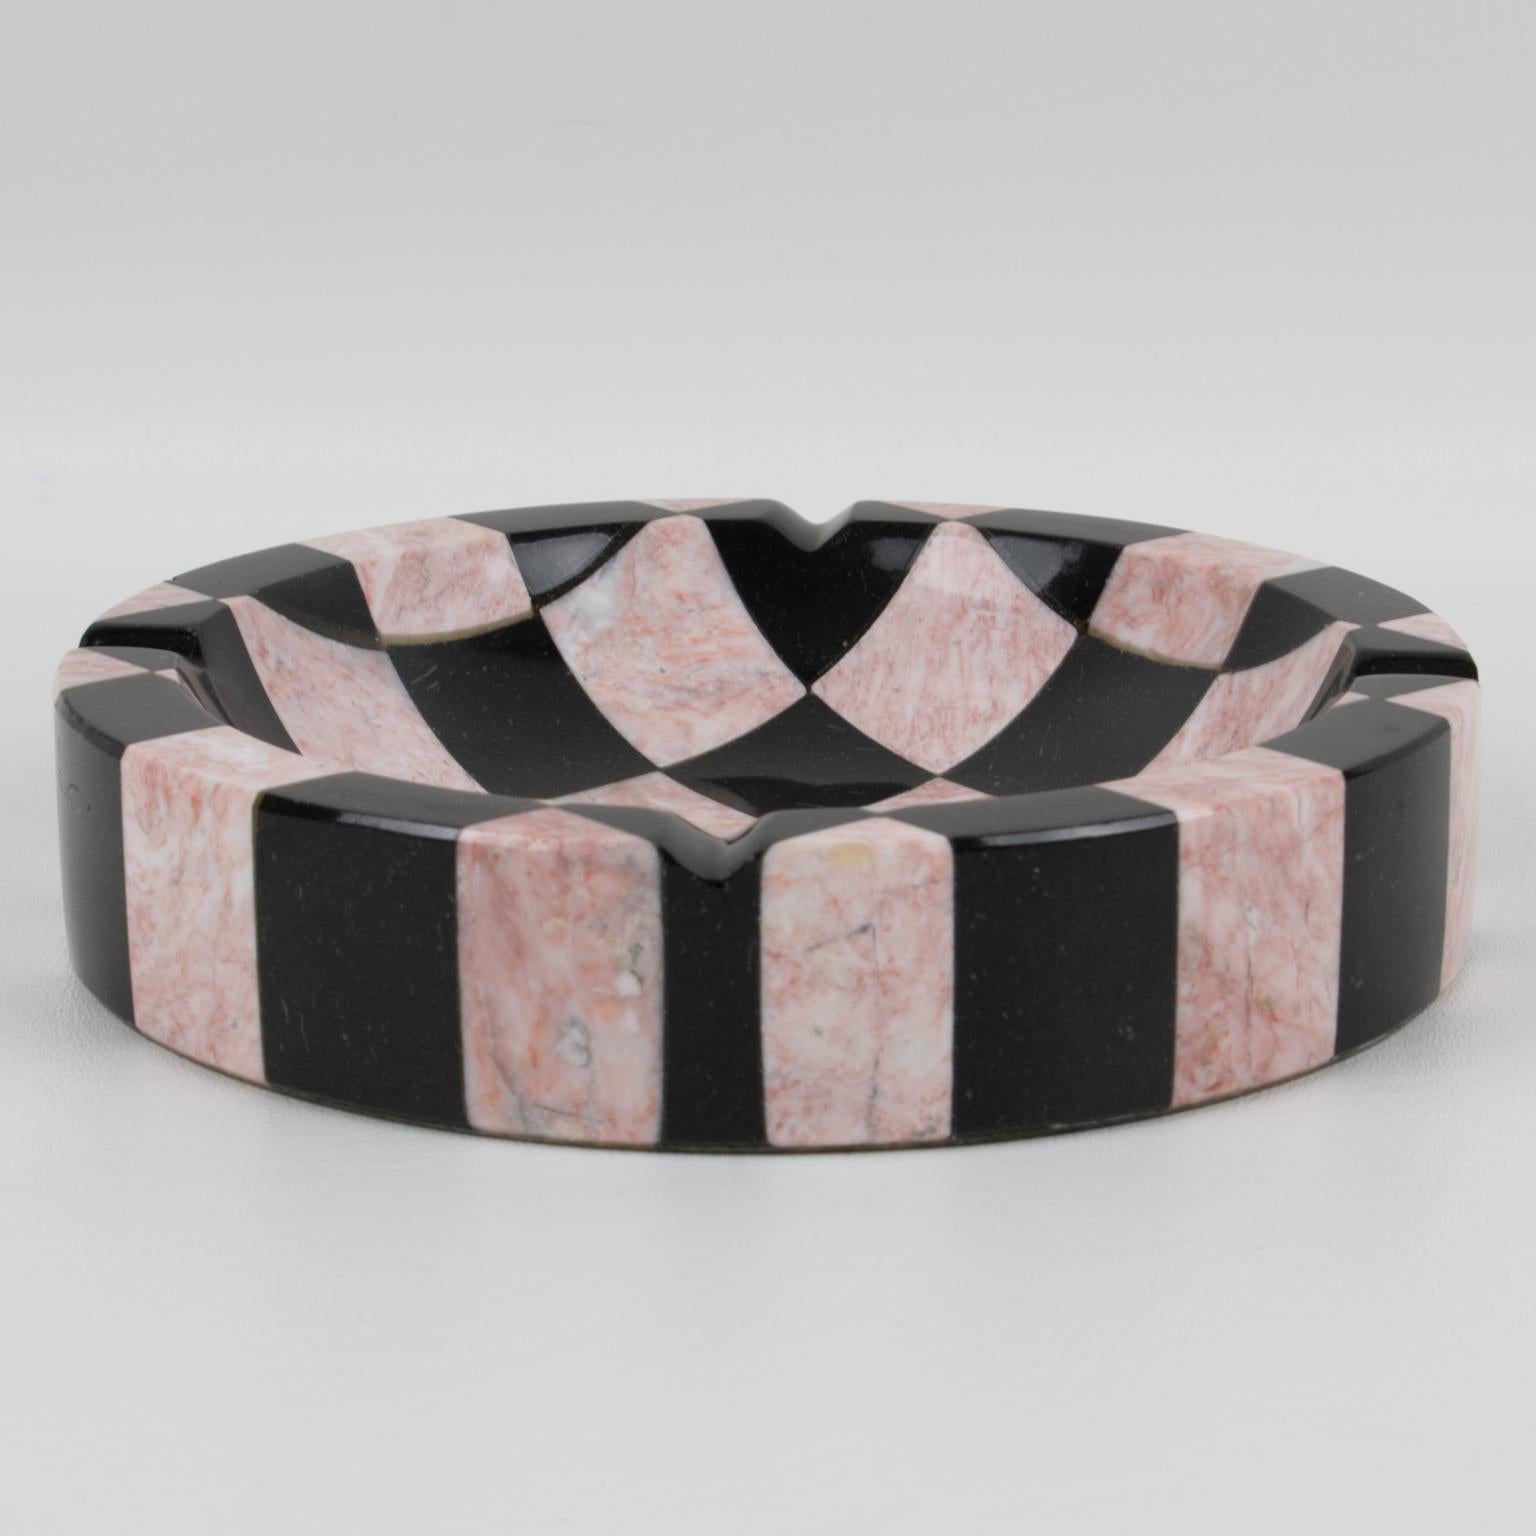 Spectacular large 1970s Italian modernist marble cigar ashtray, desk tidy, vide poche, or catchall. Extra thick marble slab with a checkerboard pattern, and black and pink color stone. No visible maker's mark.
Measurements: 7.88 in. diameter (20